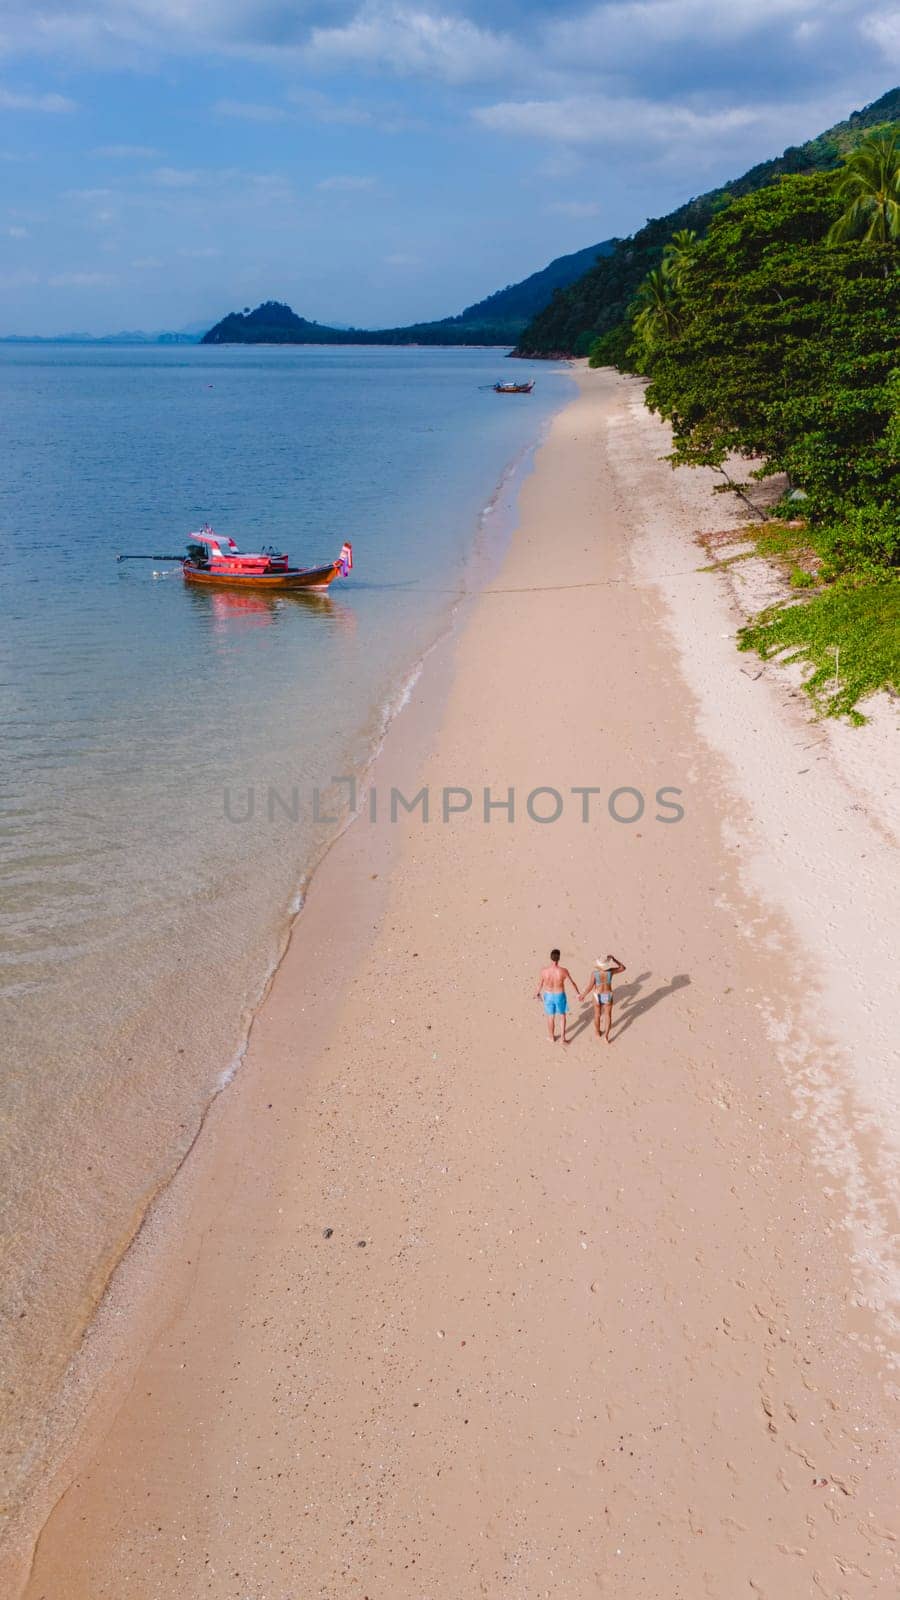 A beautiful view of a calm beach with crystal clear water on the blue sky at Koh Libong, Trang province, Thailand, Andaman Sea. A couple of men and woman walking on the beach